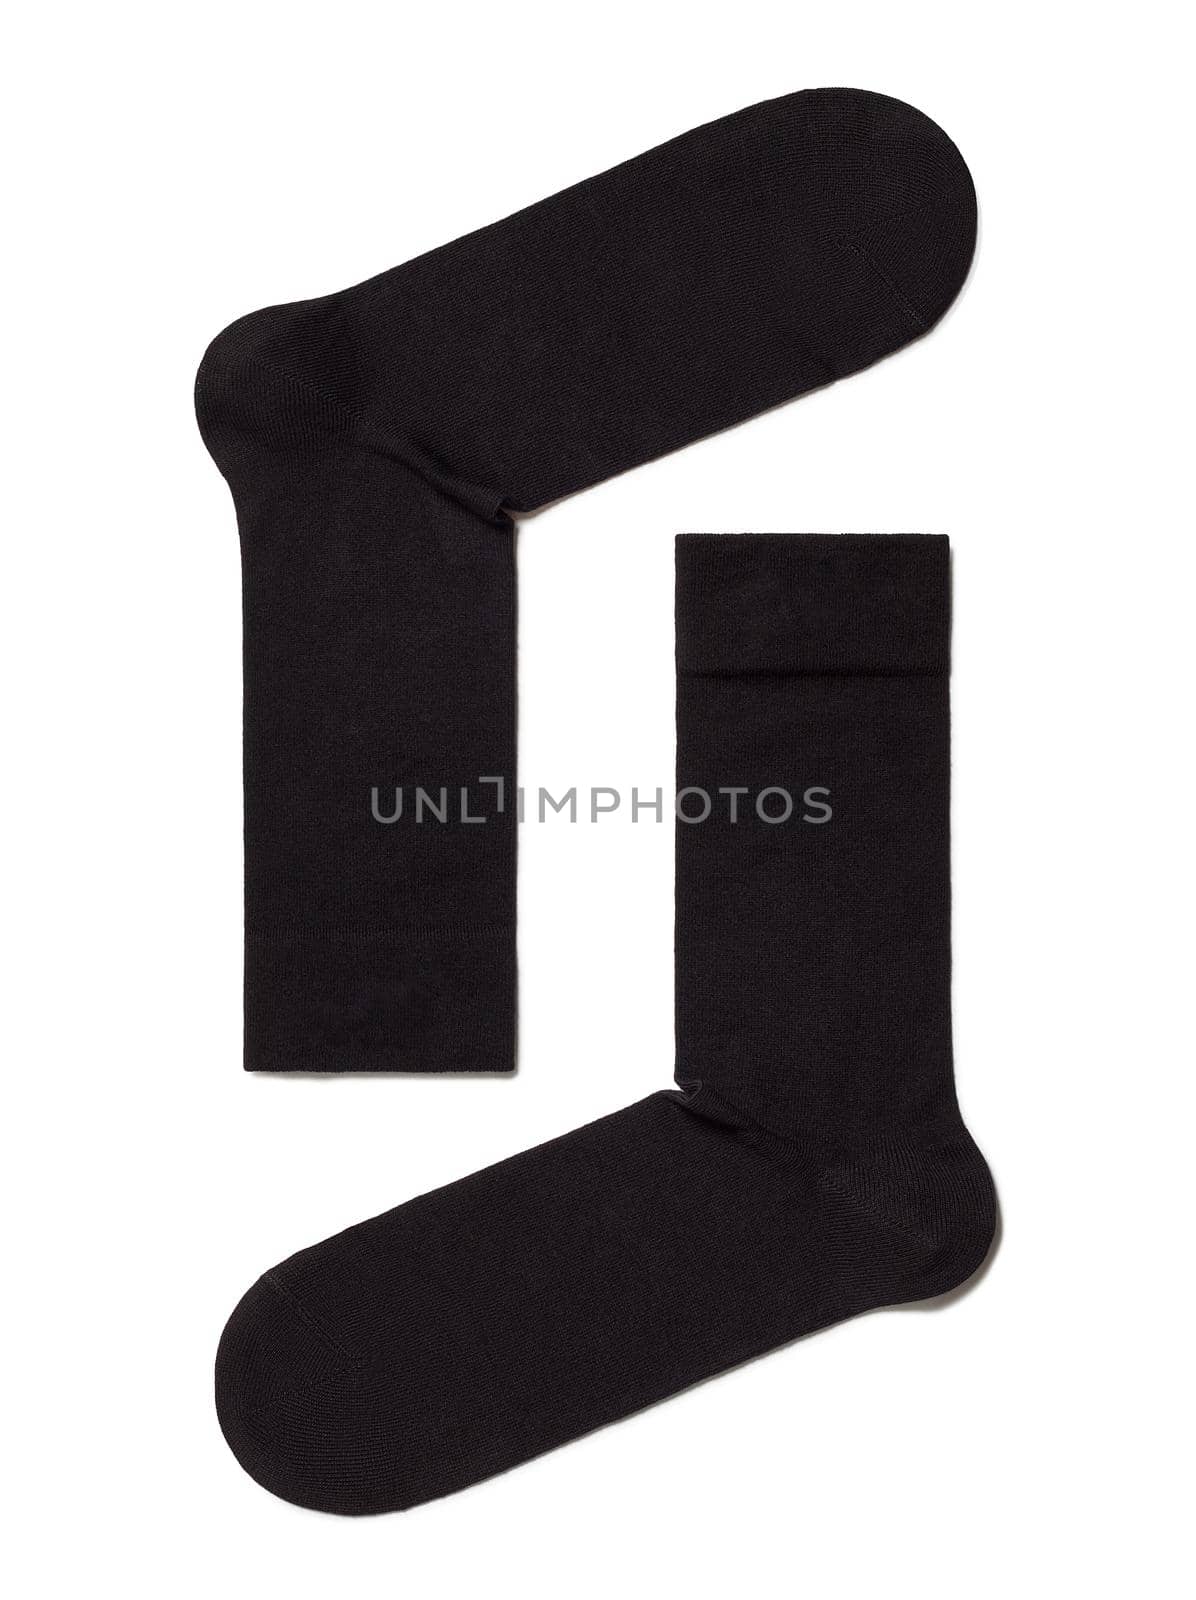 Black mans socks for clothing by BY-_-BY